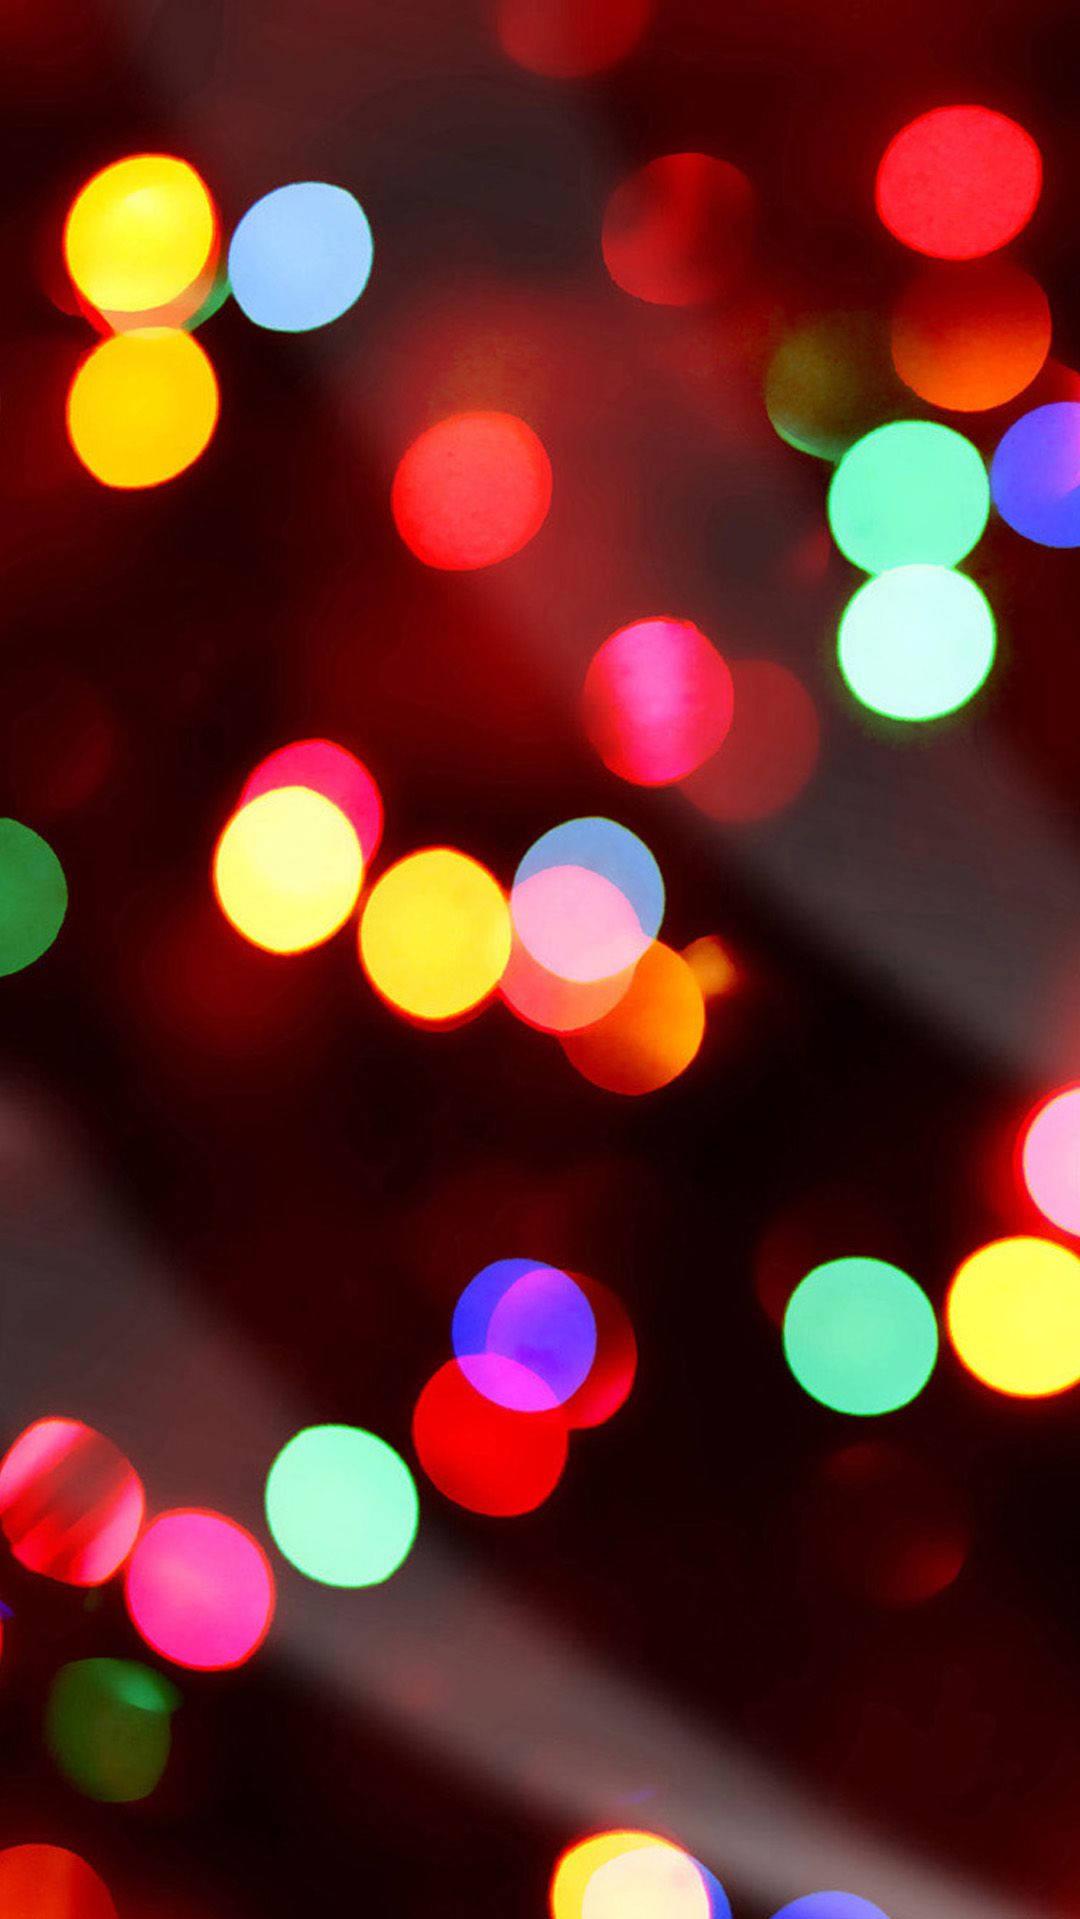 A Close Up Of Red And Green Christmas Tree Wallpaper